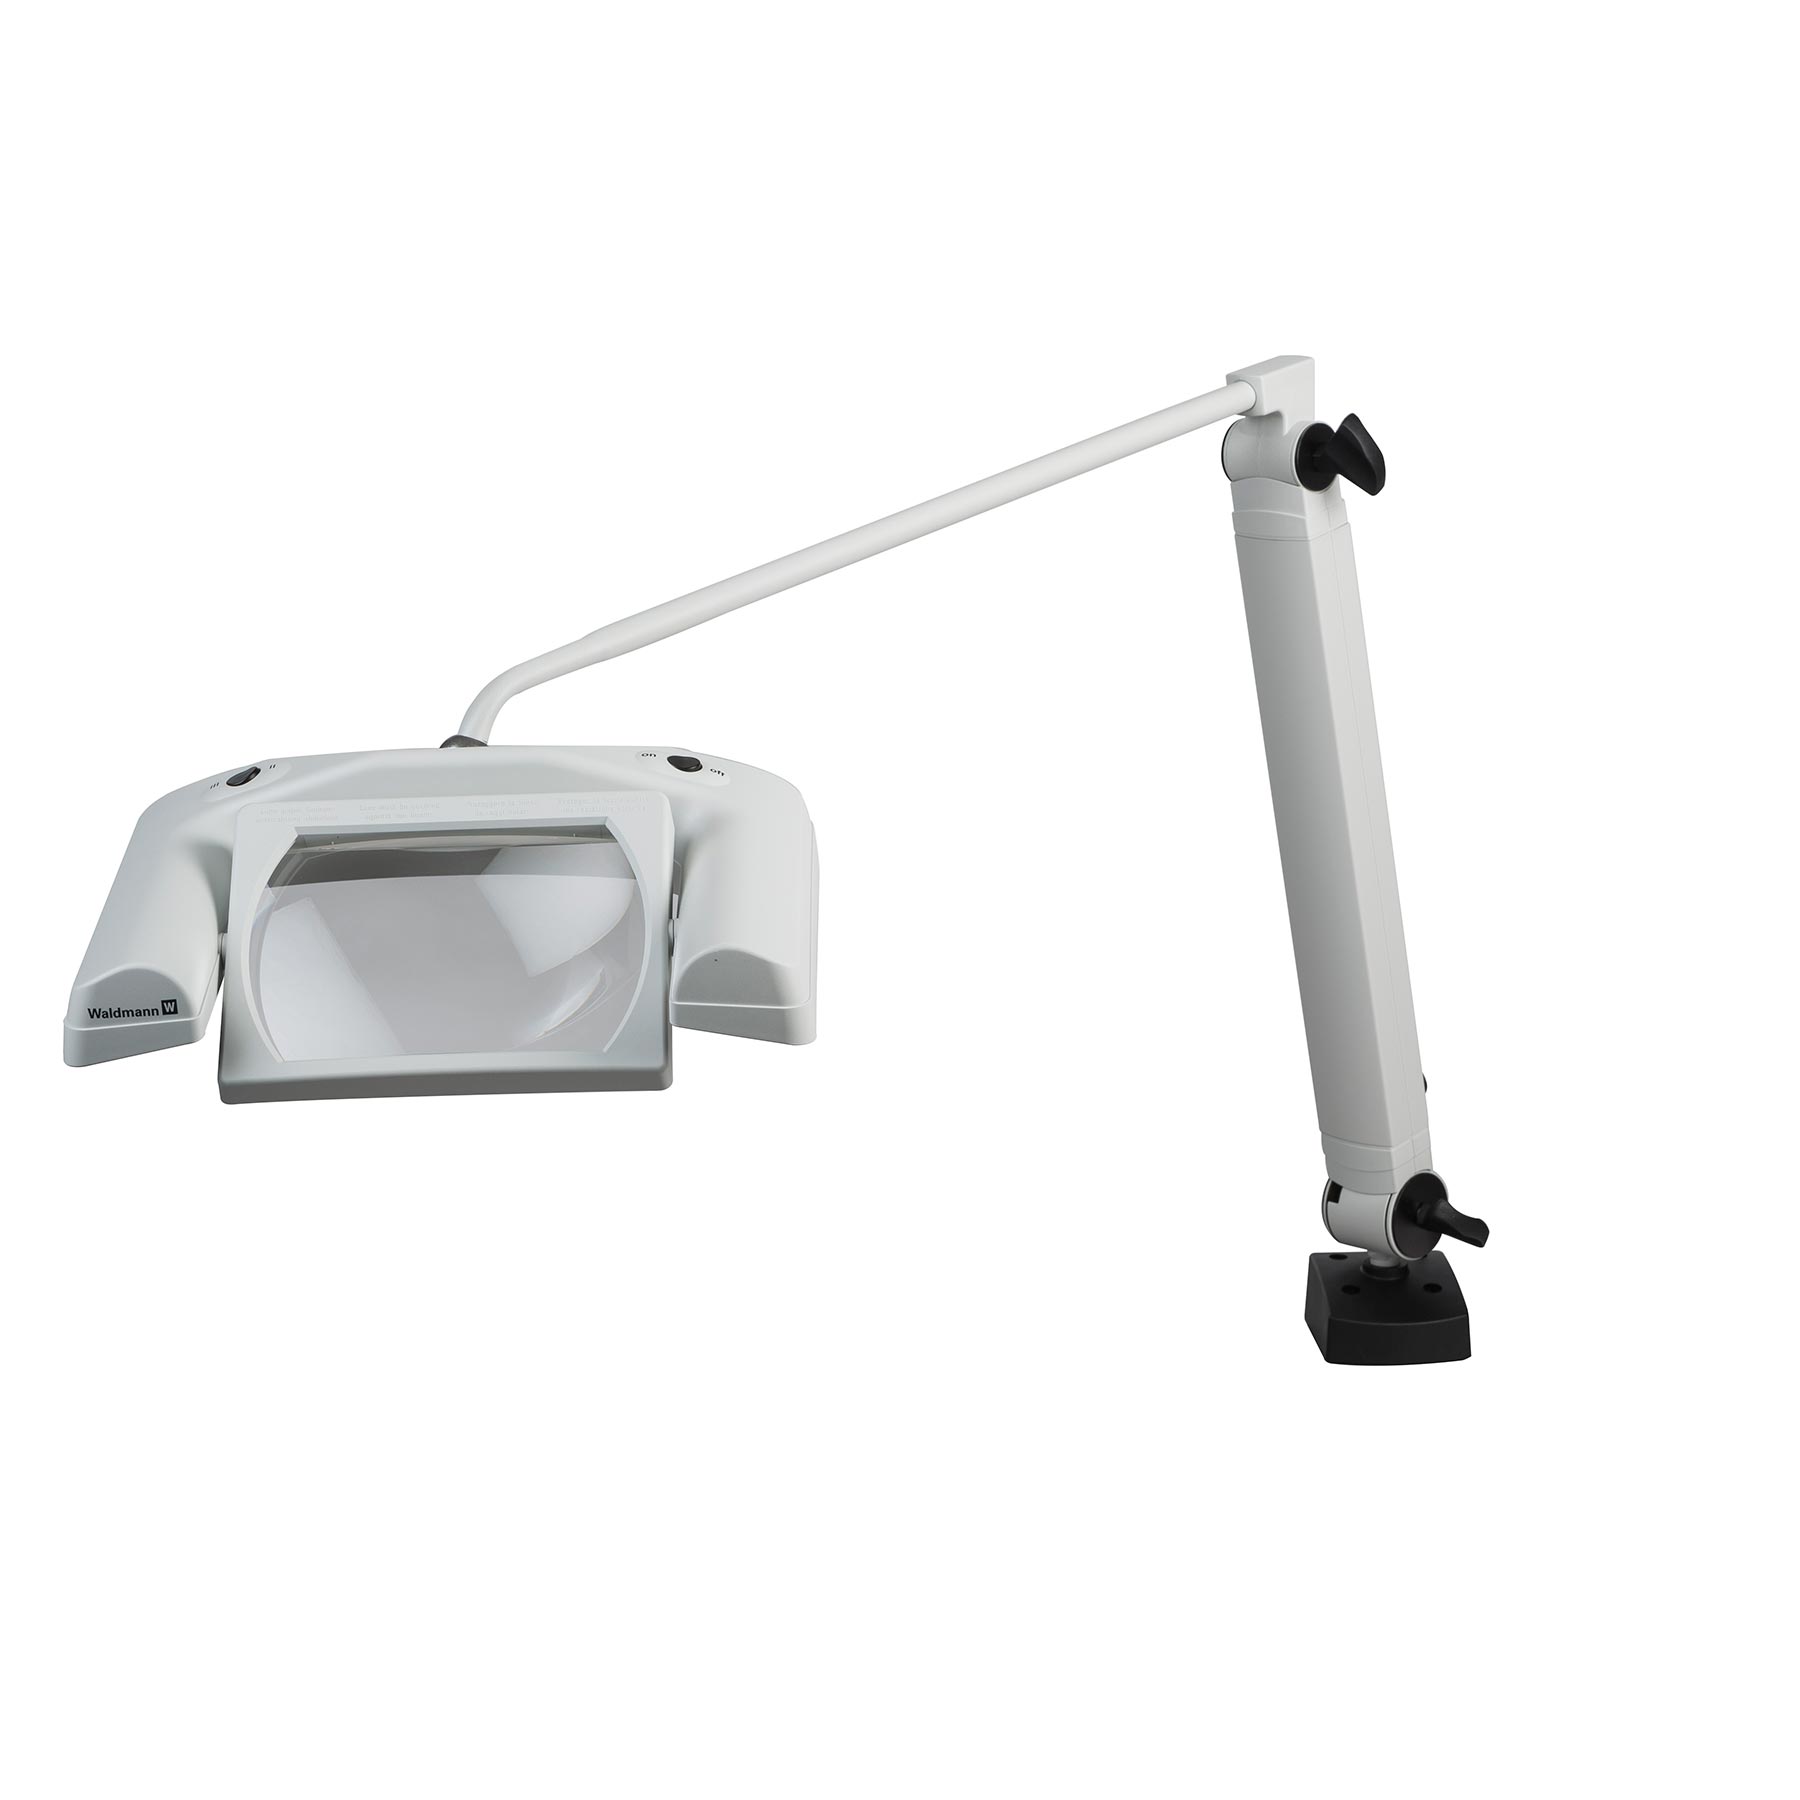 Hospital equipment led magnifier with clamp.